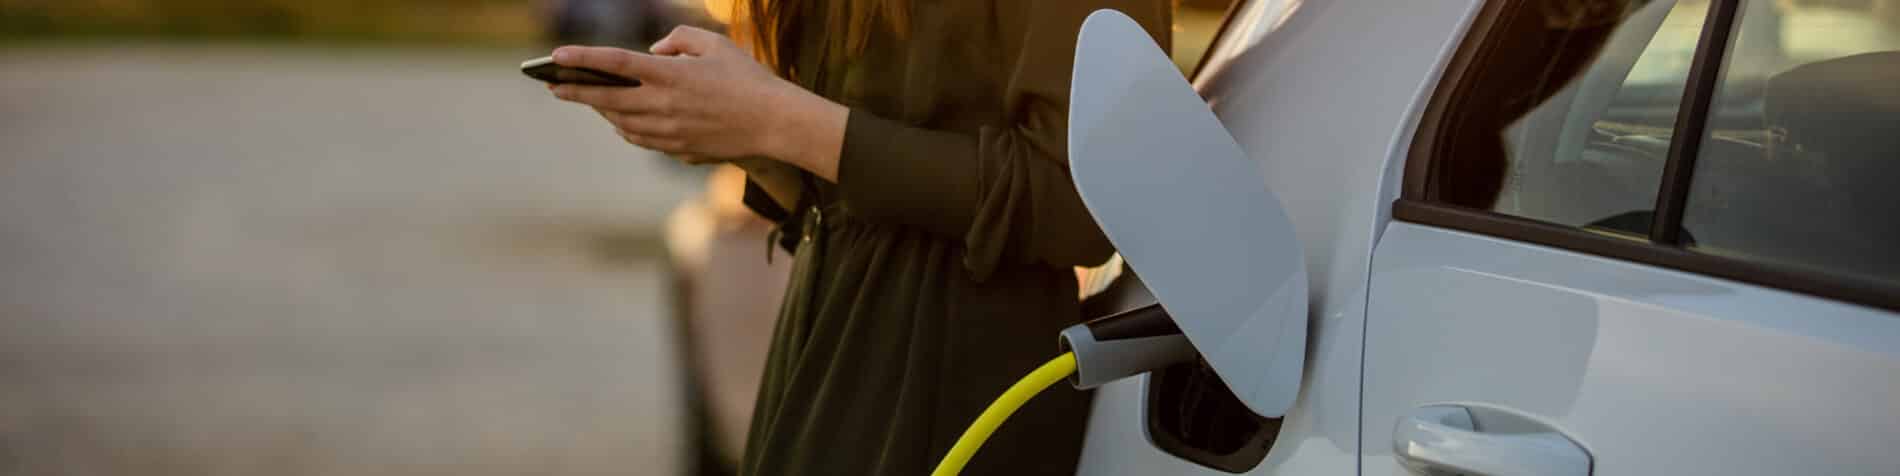 SAP Introduces E-Mobility Solution for Electric Vehicle Fleet